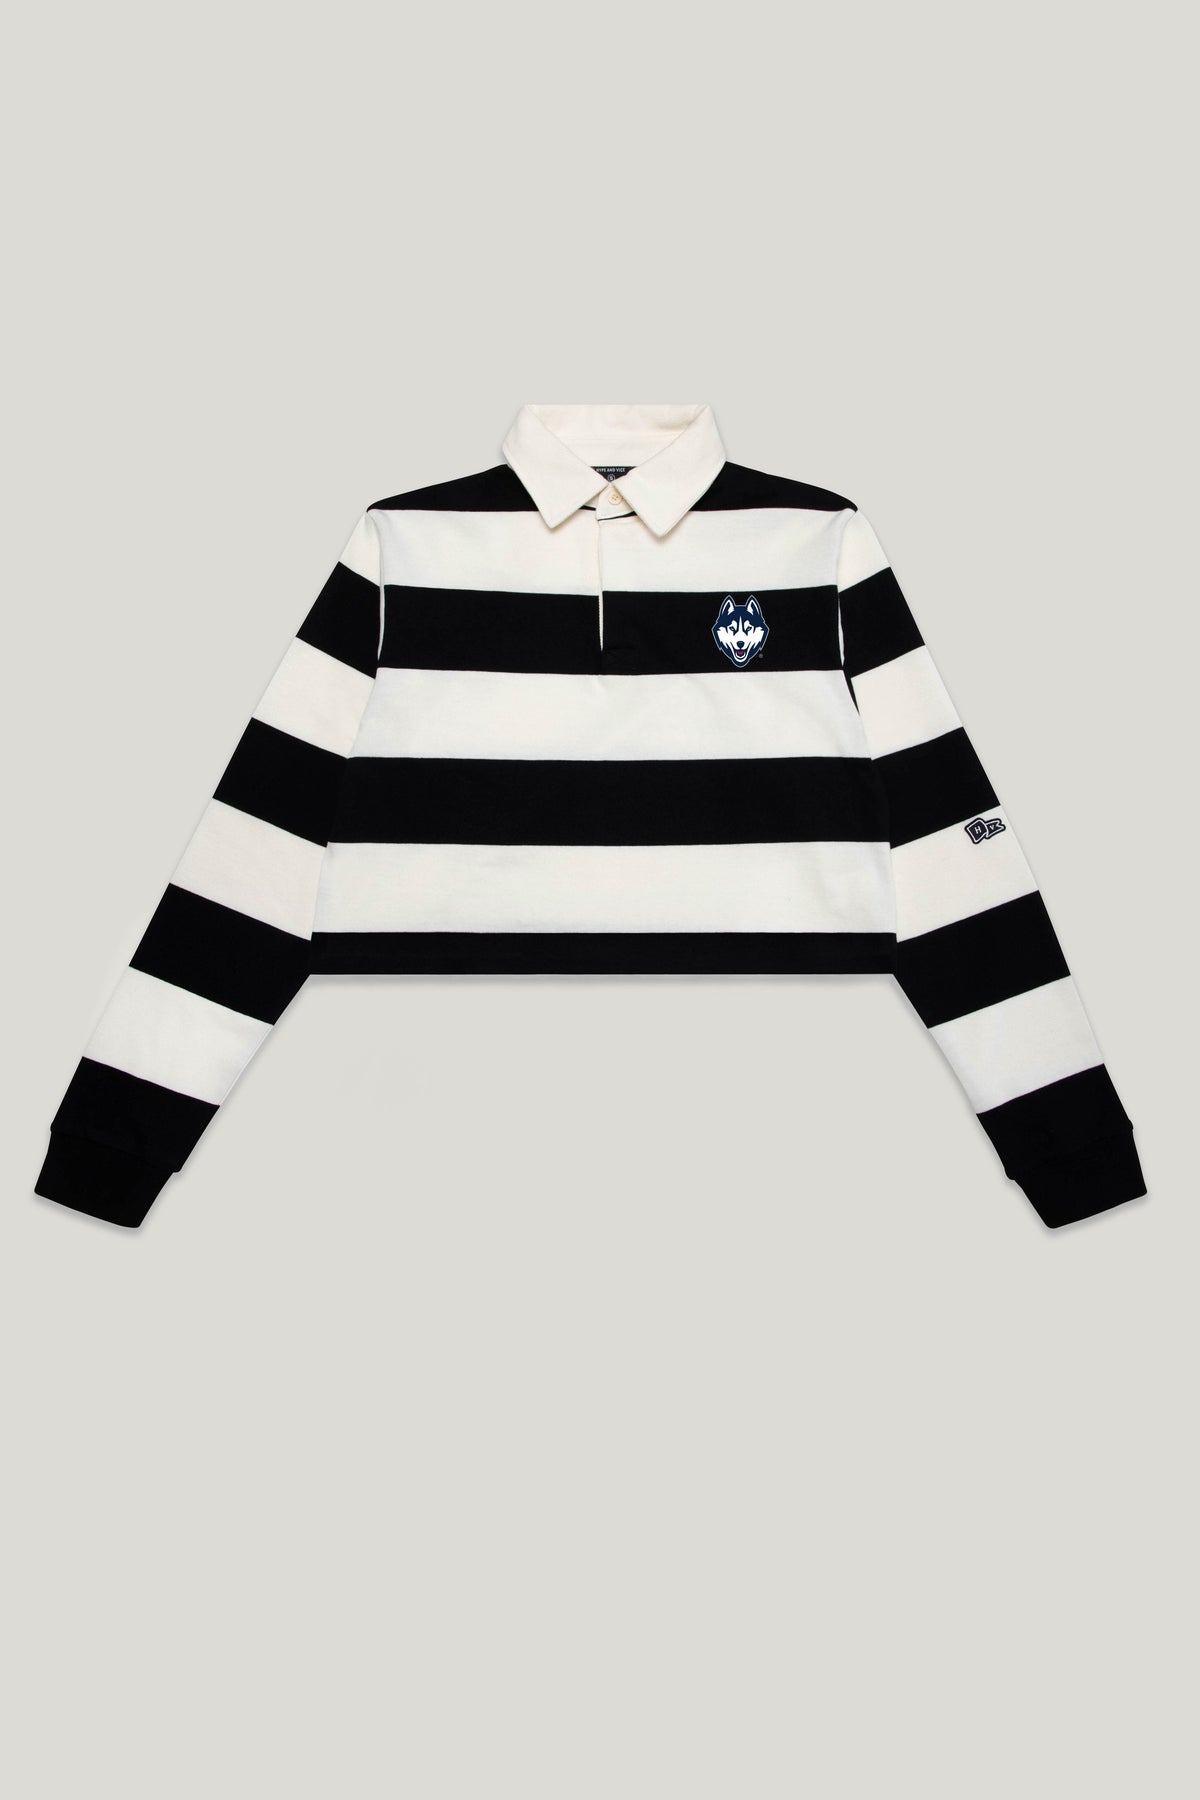 UConn Rugby Top